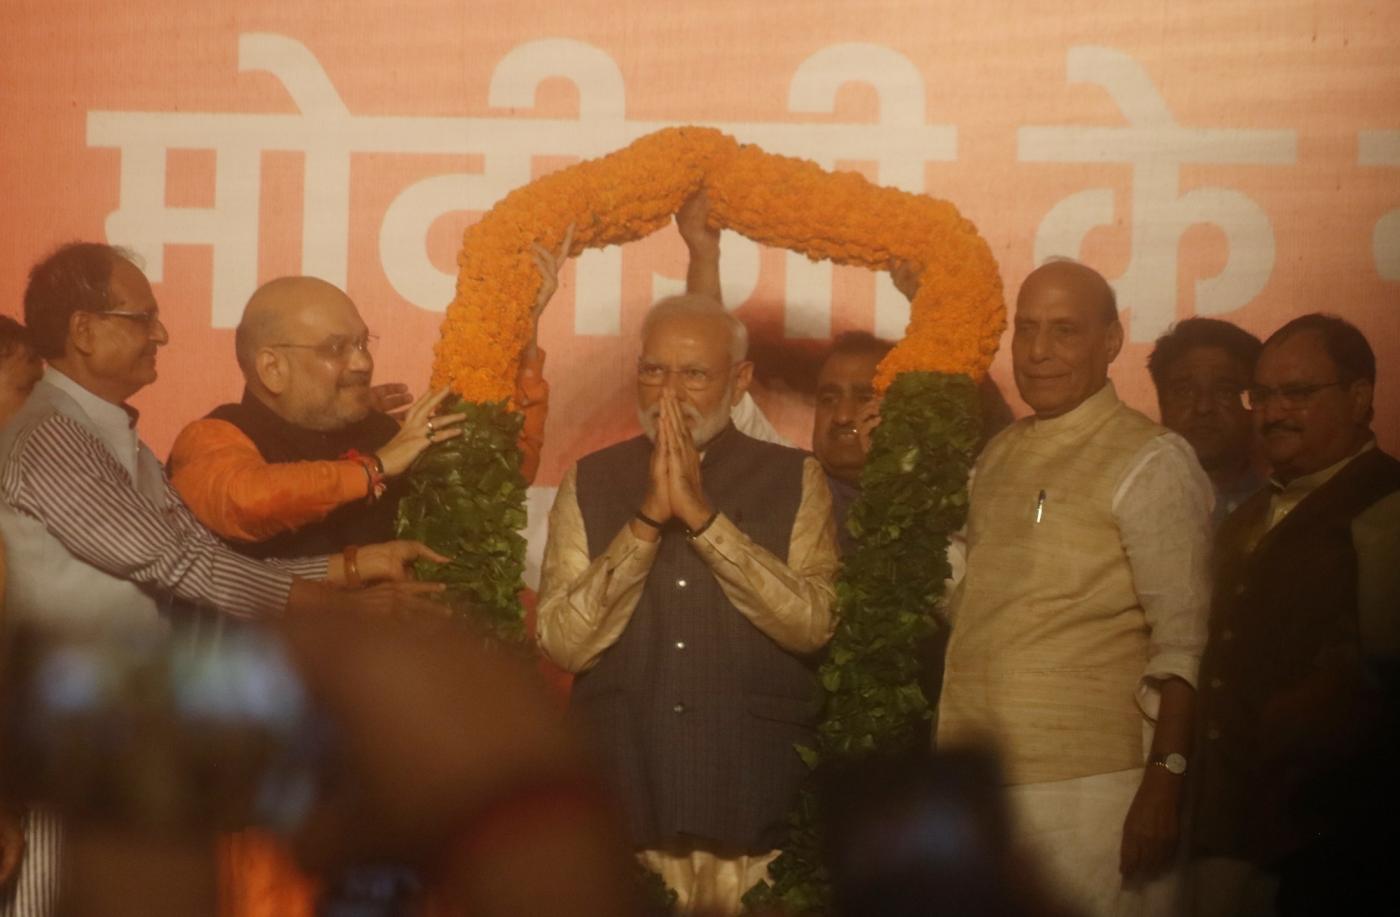 New Delhi: Prime Minister Narendra Modi being welcomed by BJP chief Amit Shah, party leader Shivraj Singh Chouhan and Union Ministers Rajnath Singh and J.P. Nadda, on his arrival to address party workers at the party's headquarters in New Delhi, on May 23, 2019. In a stunning electoral showing, the BJP led by Prime Minister Narendra Modi was on Thursday set to retain power for another five years after making a sweep of the Lok Sabha battle and mauling the opposition. (Photo: Bidesh Manna/IANS) by .